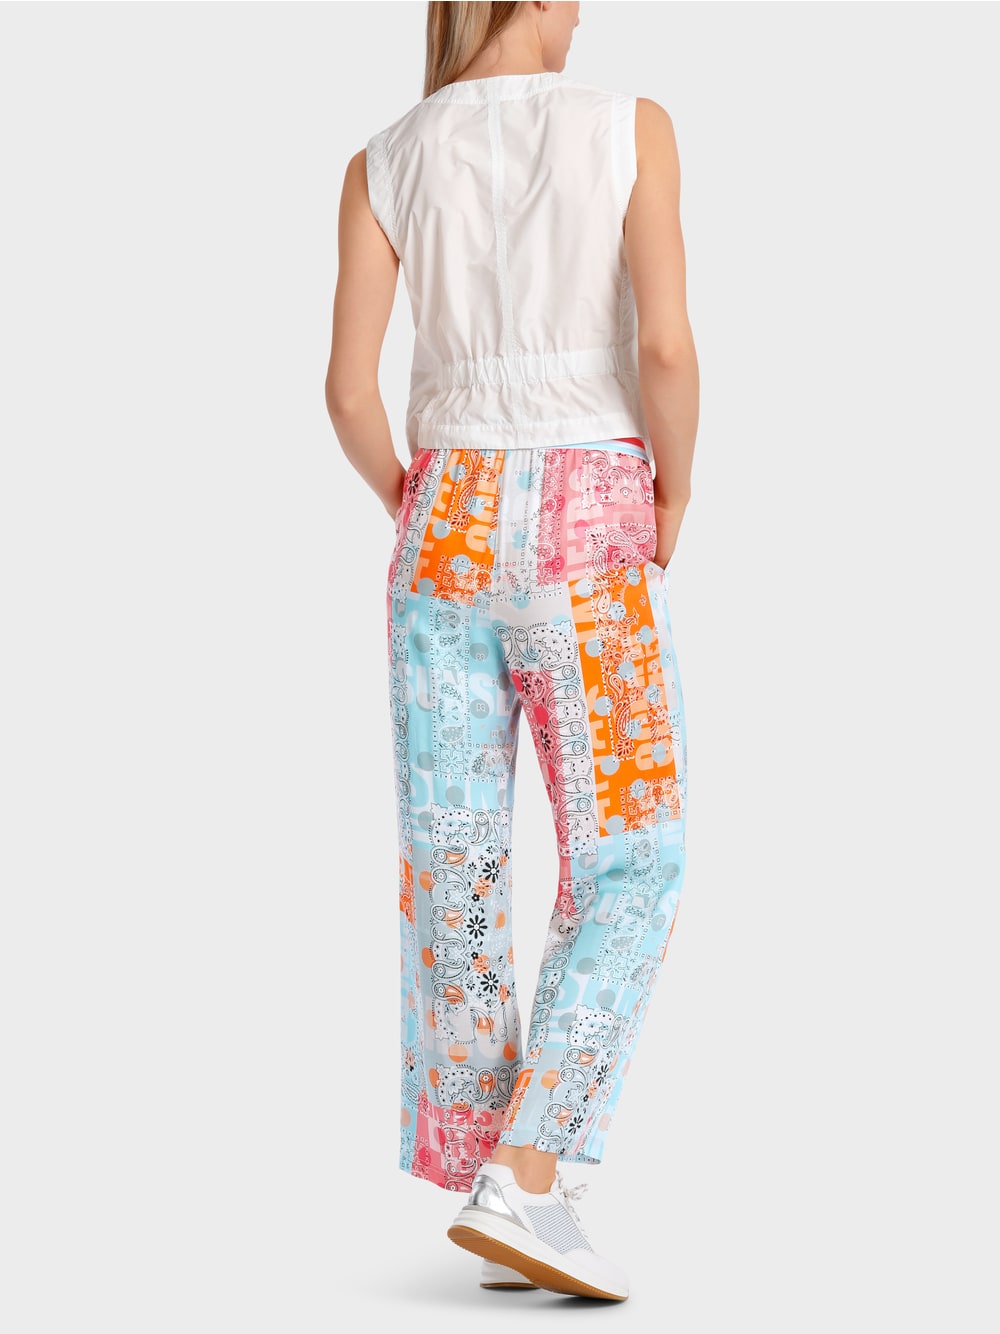 Marc Cain Bandanna Print WELBY model in culottes style